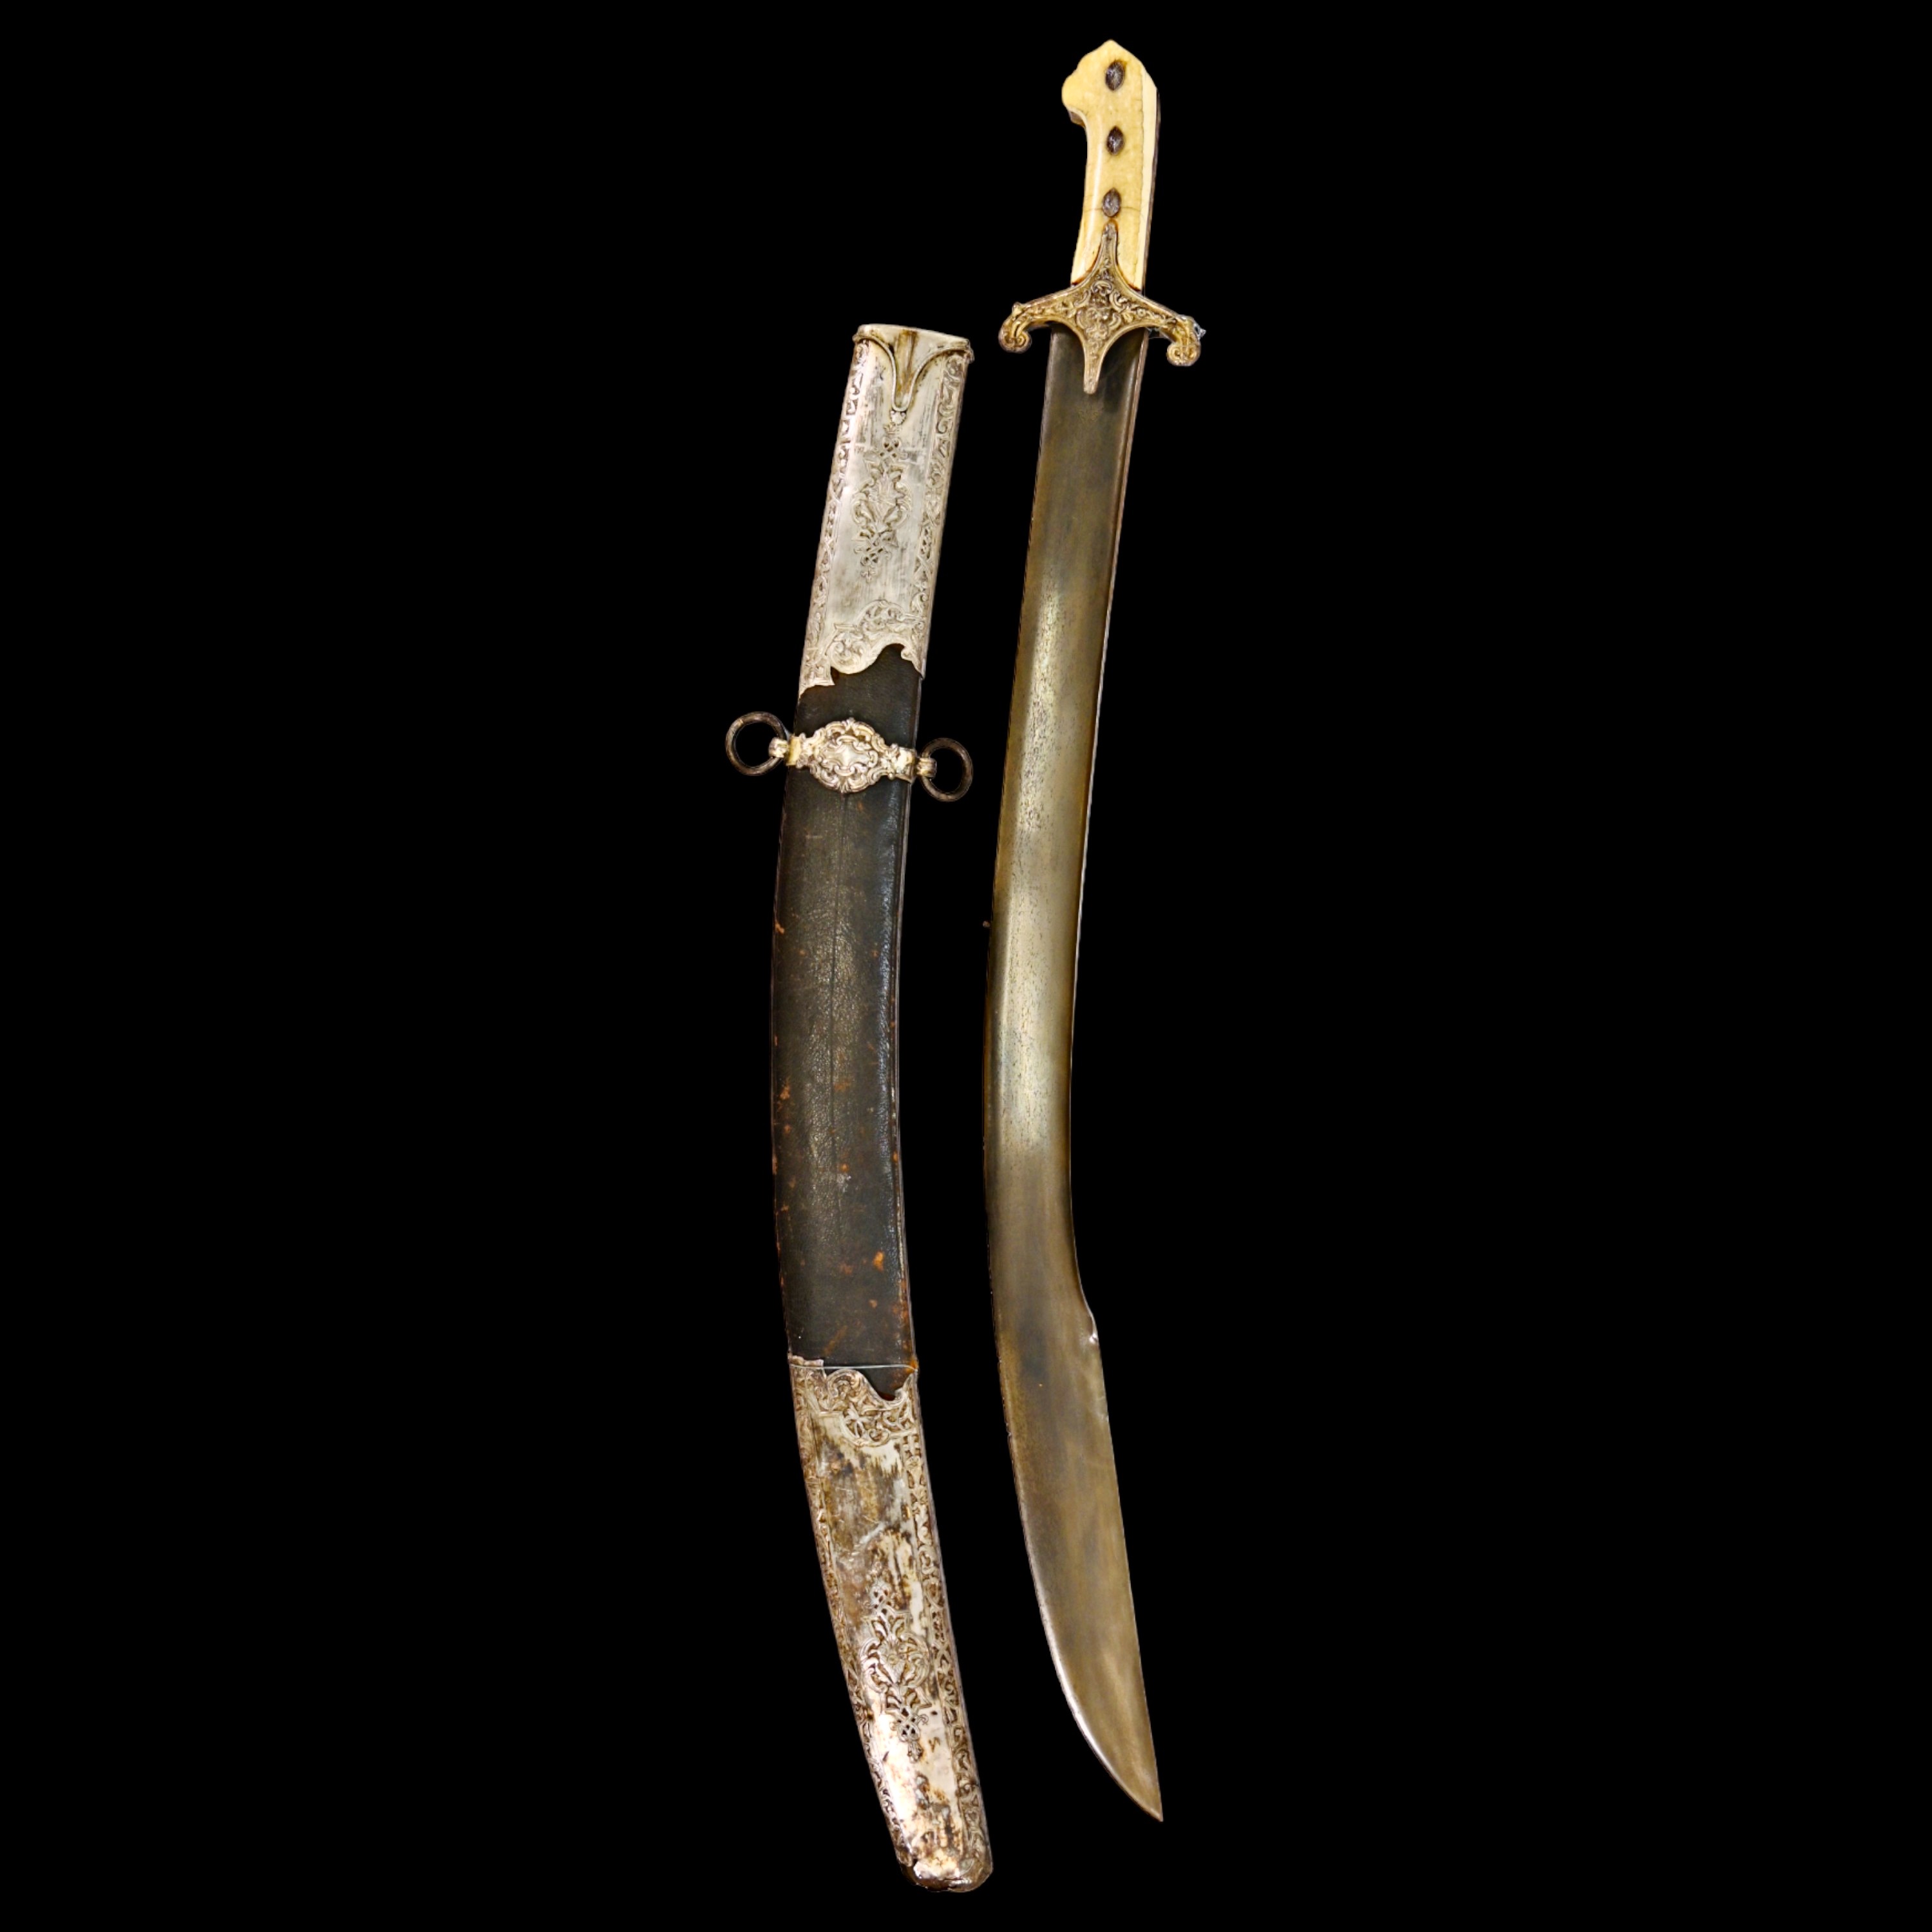 Rare Ottoman saber KARABELA, wootz blade, silver with the tugra of Sultan Ahmed III, early 18th C. - Image 20 of 27